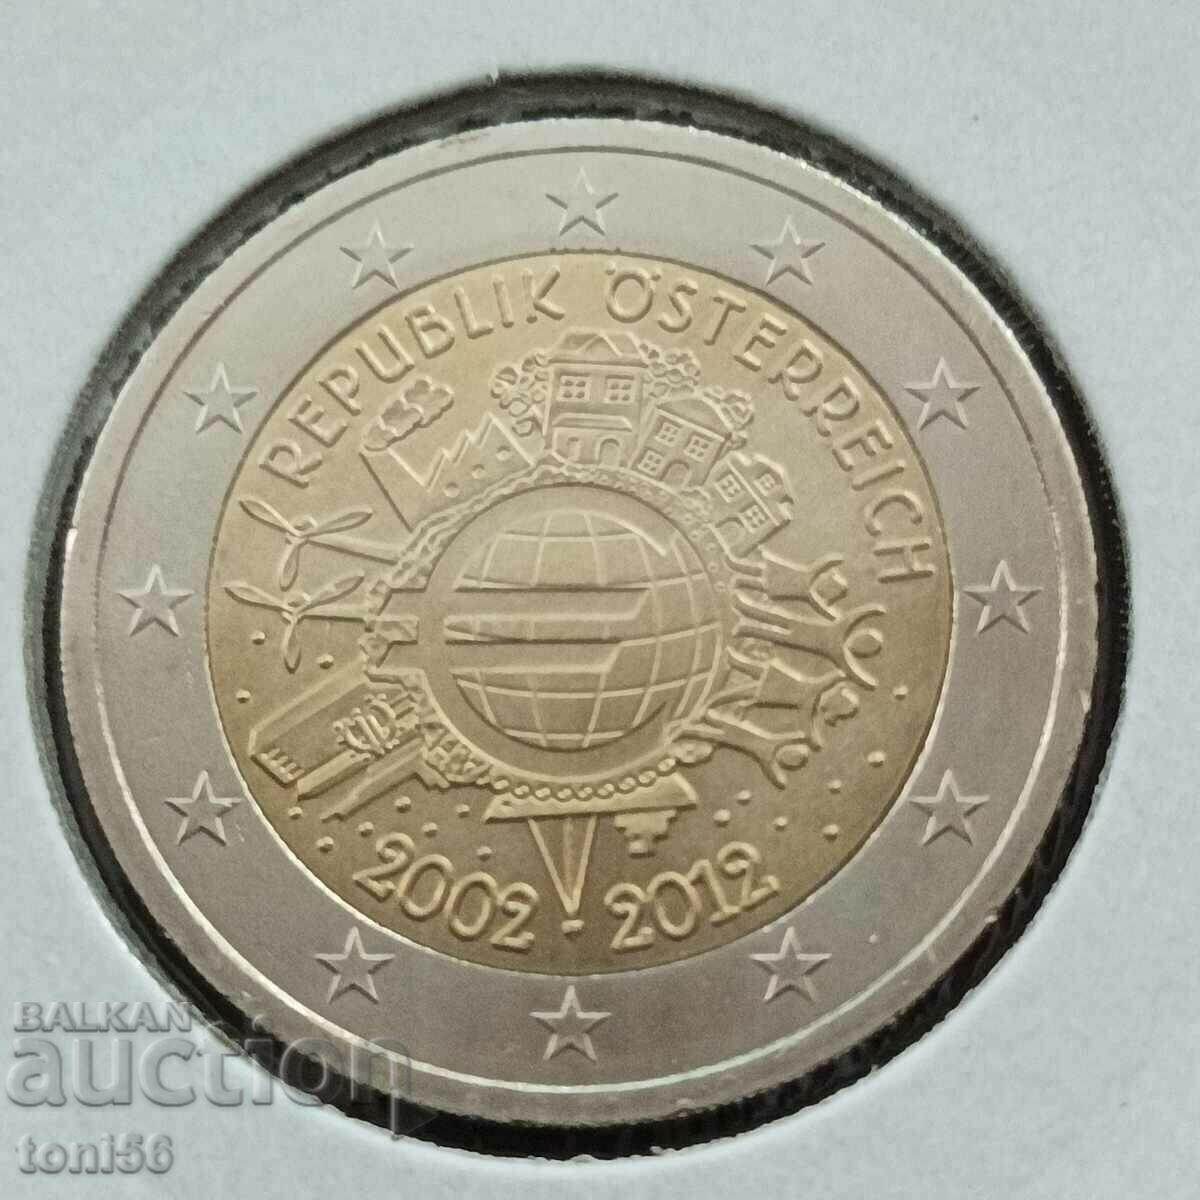 Austria 2 euro 2012 - 10 years "Euro coins and banknotes"